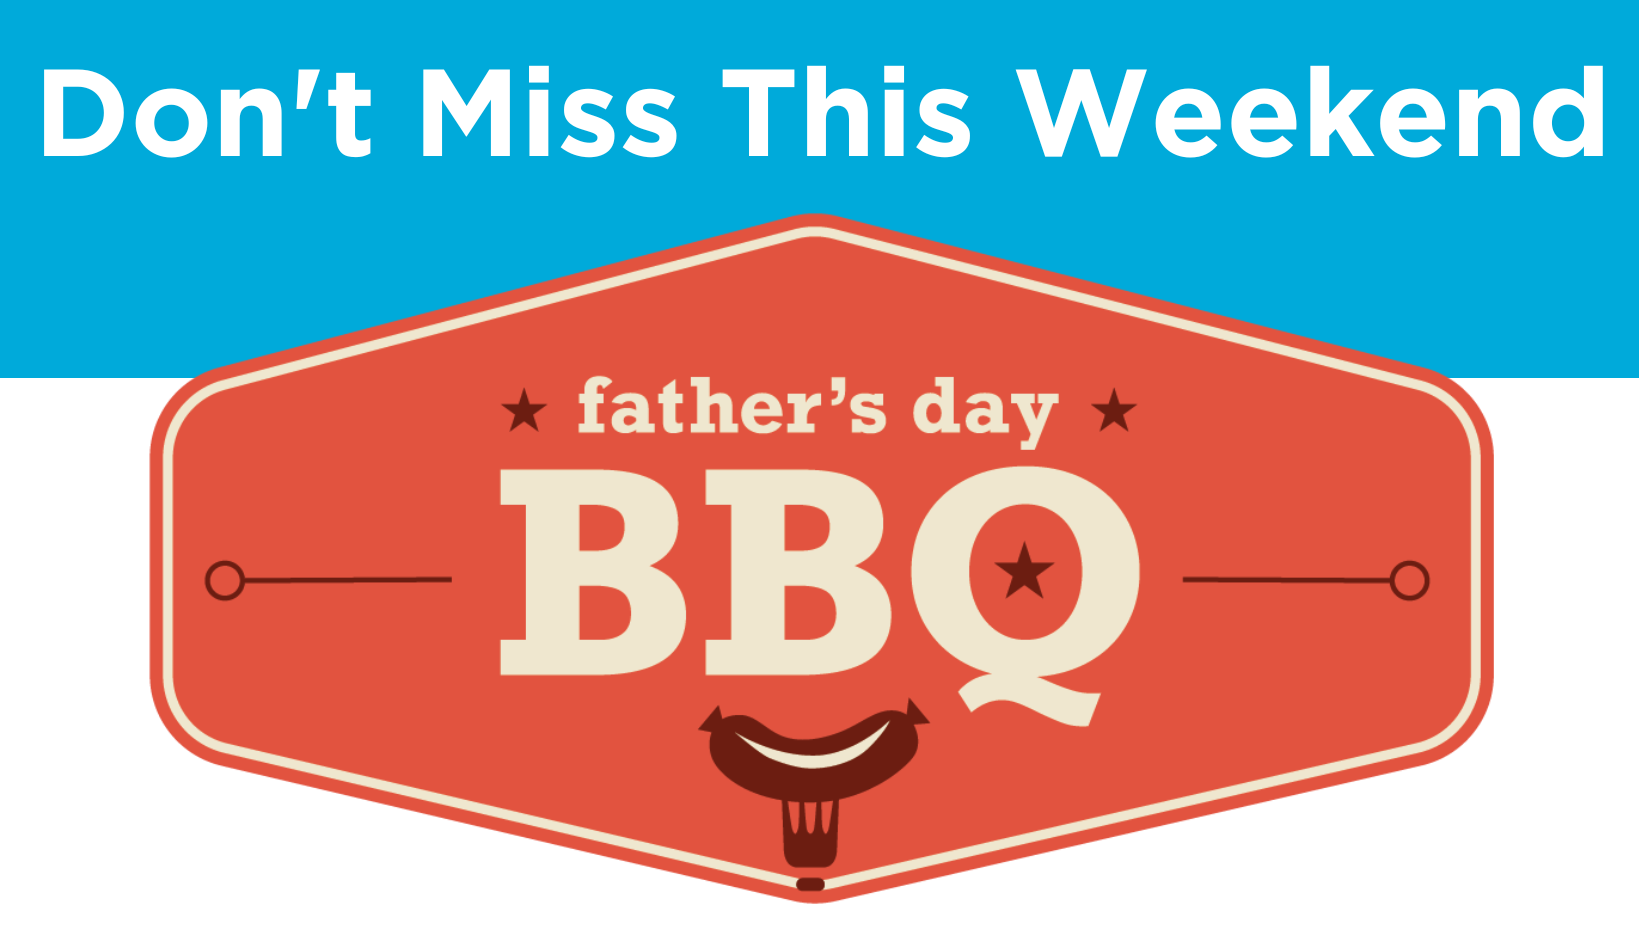 Don't Miss This Weekend - Father's Day BBQ